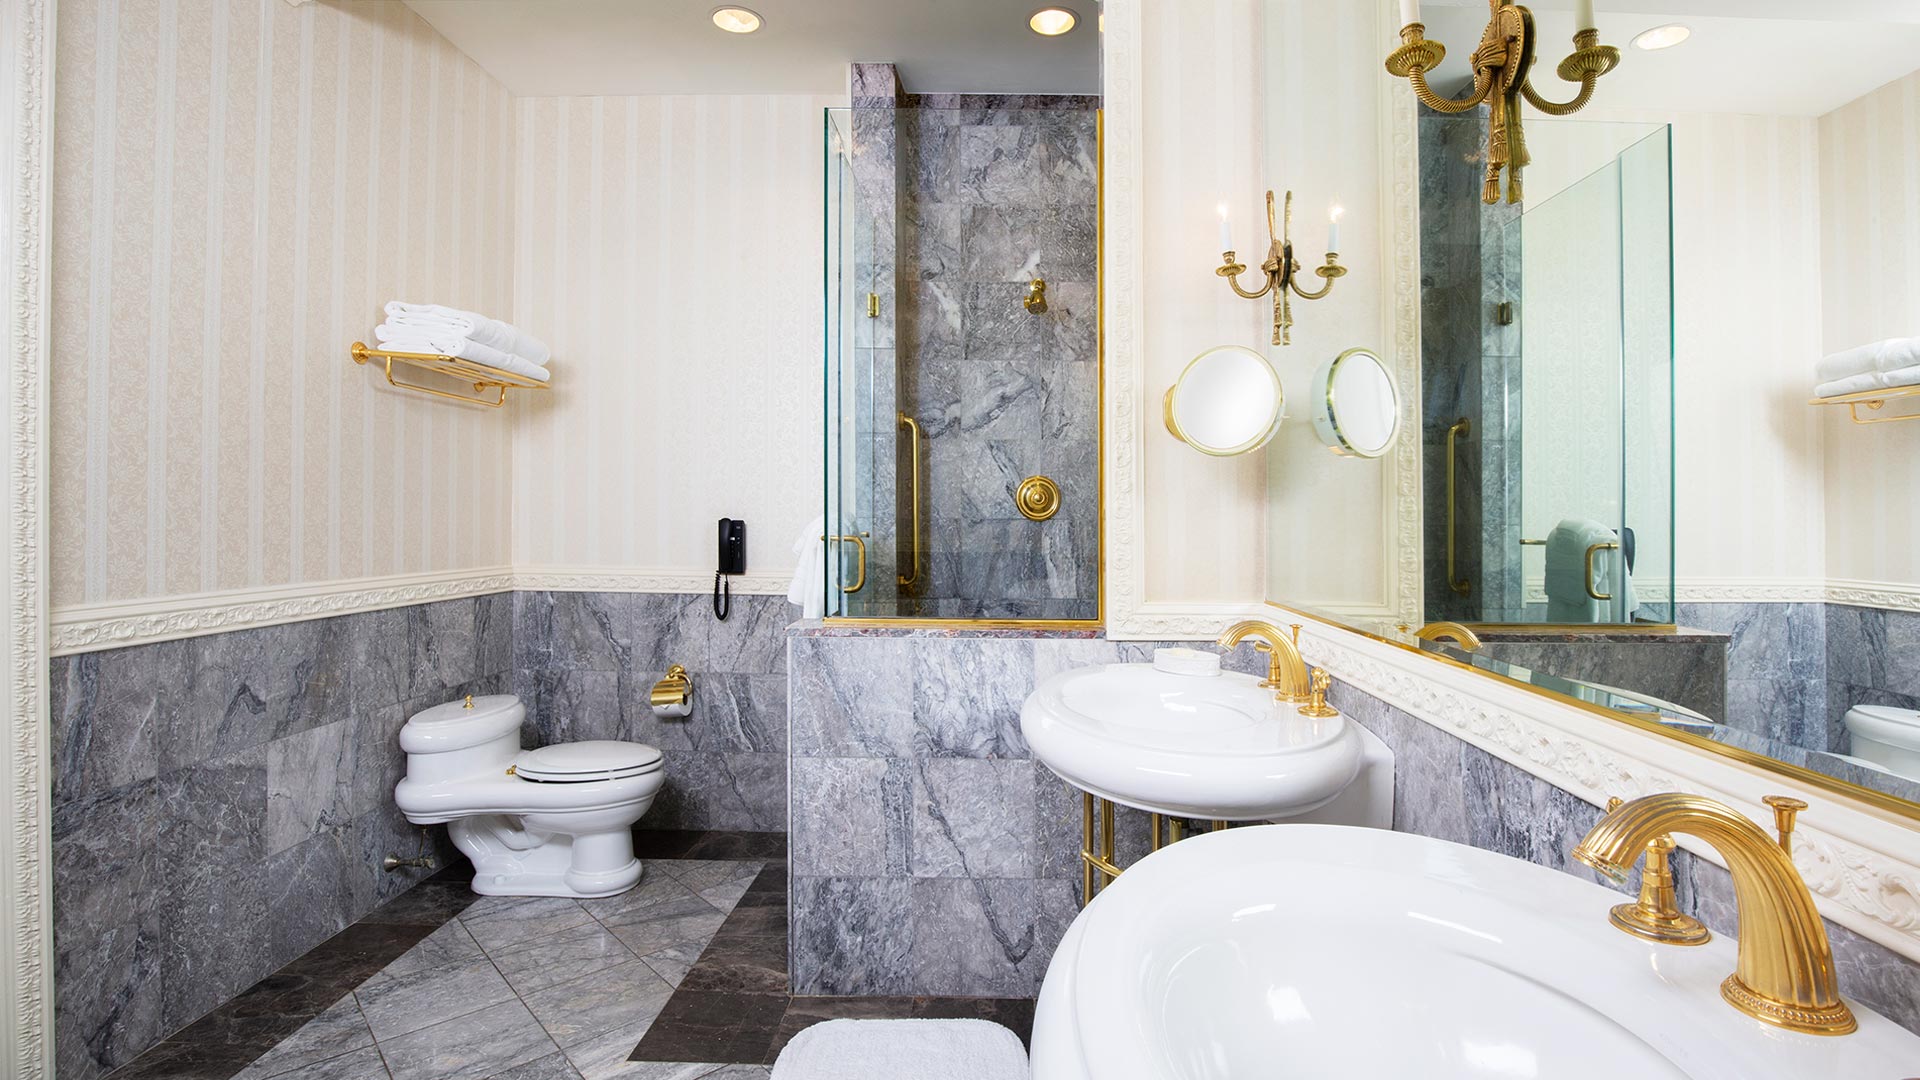 interior of the suite's bathroom. the room has neutral gray tiling, two sinks, a large mirror, and a walk in shower.